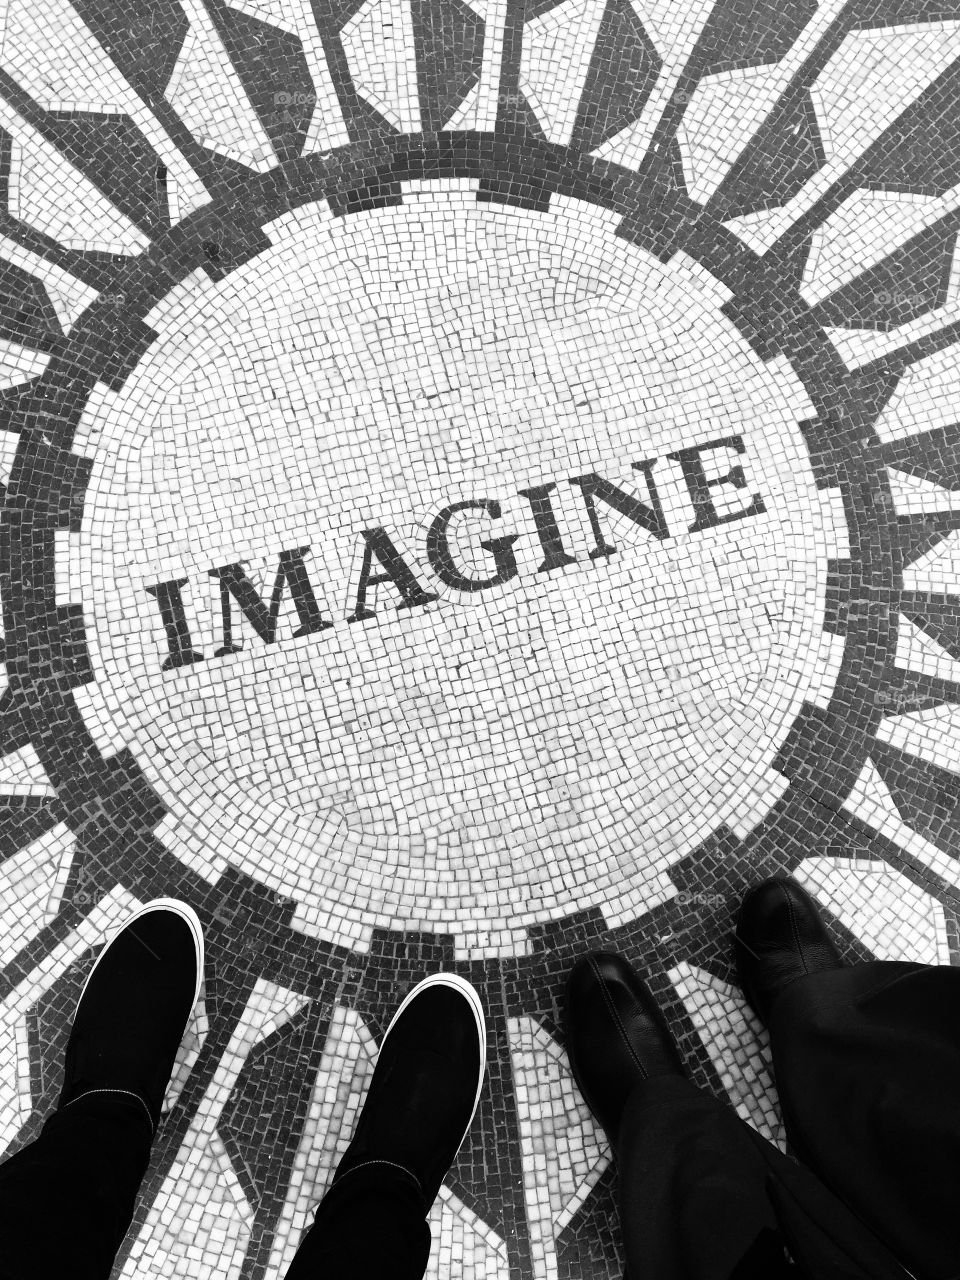 Imagine all the people, living for today